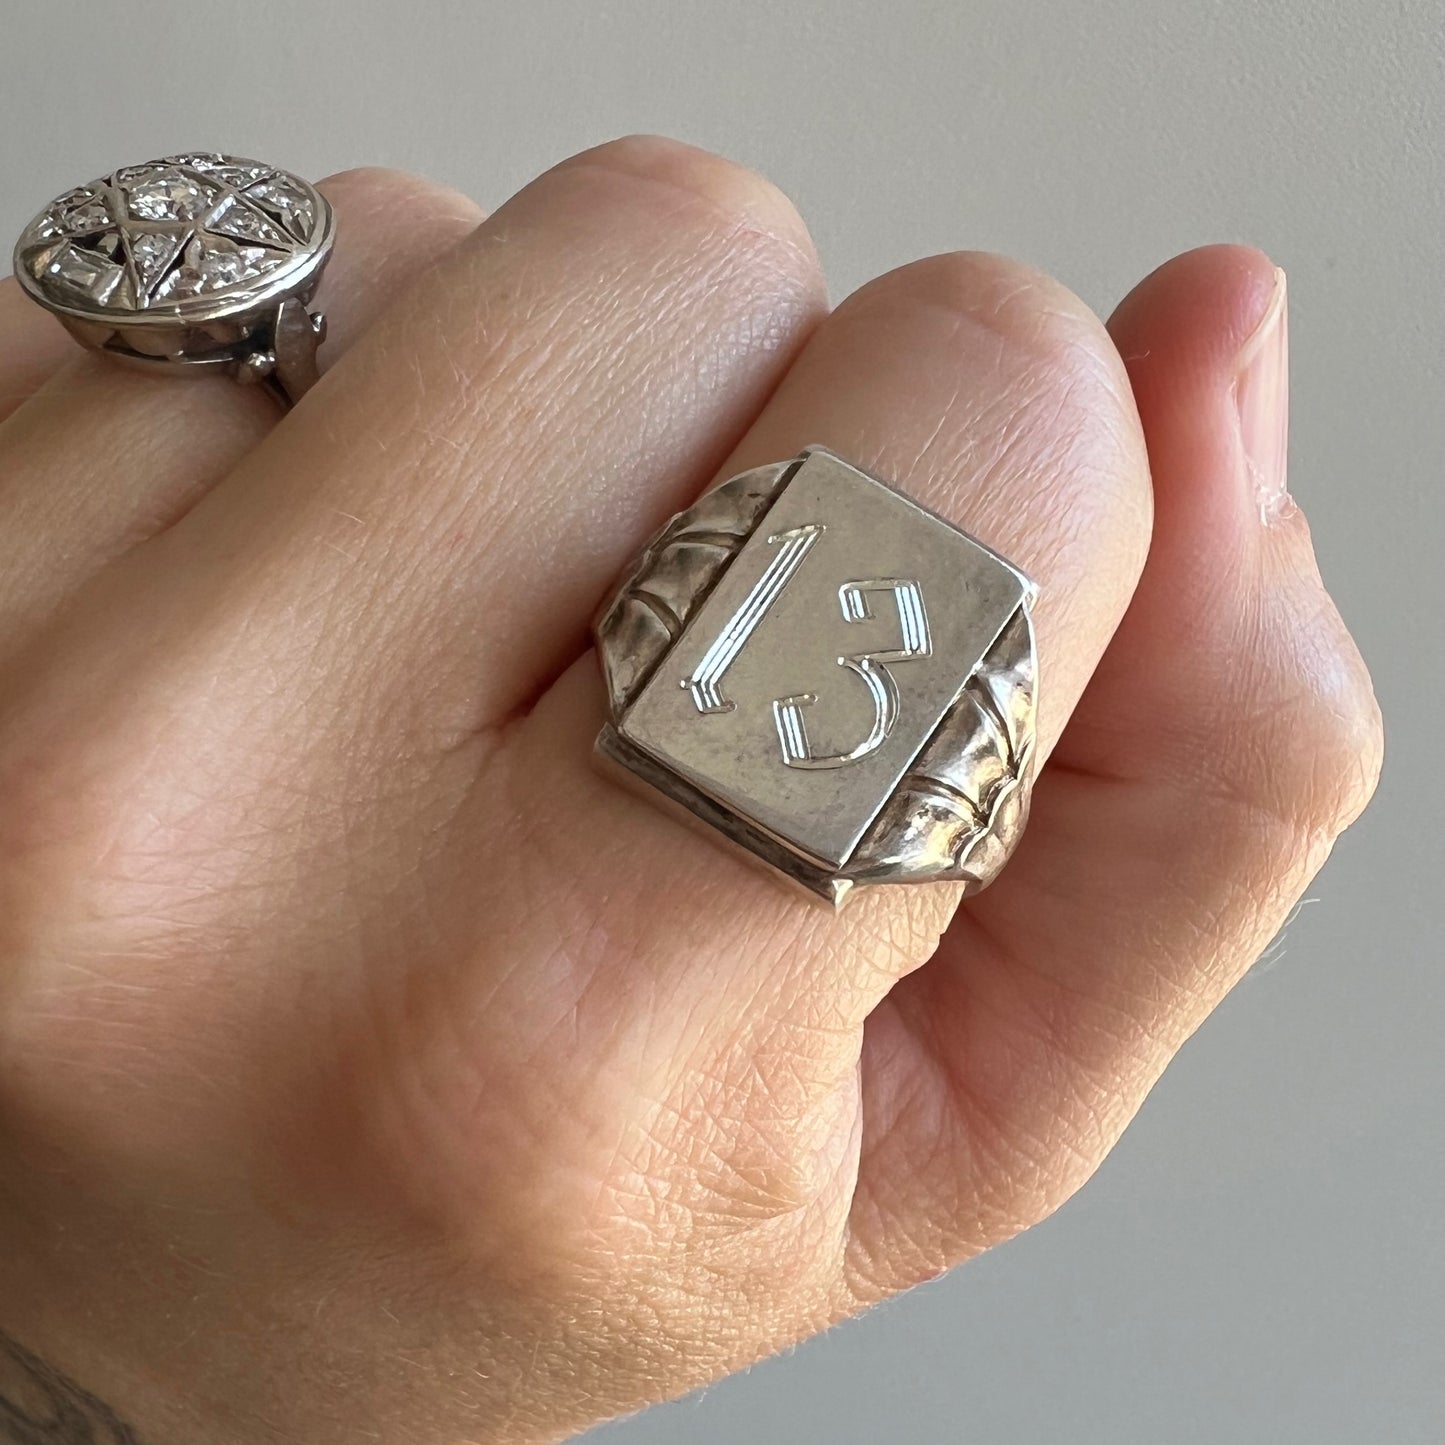 reimagined V I N T A G E // lucky 13 / 800 silver signet ring with new engraving / size 8.5-ish